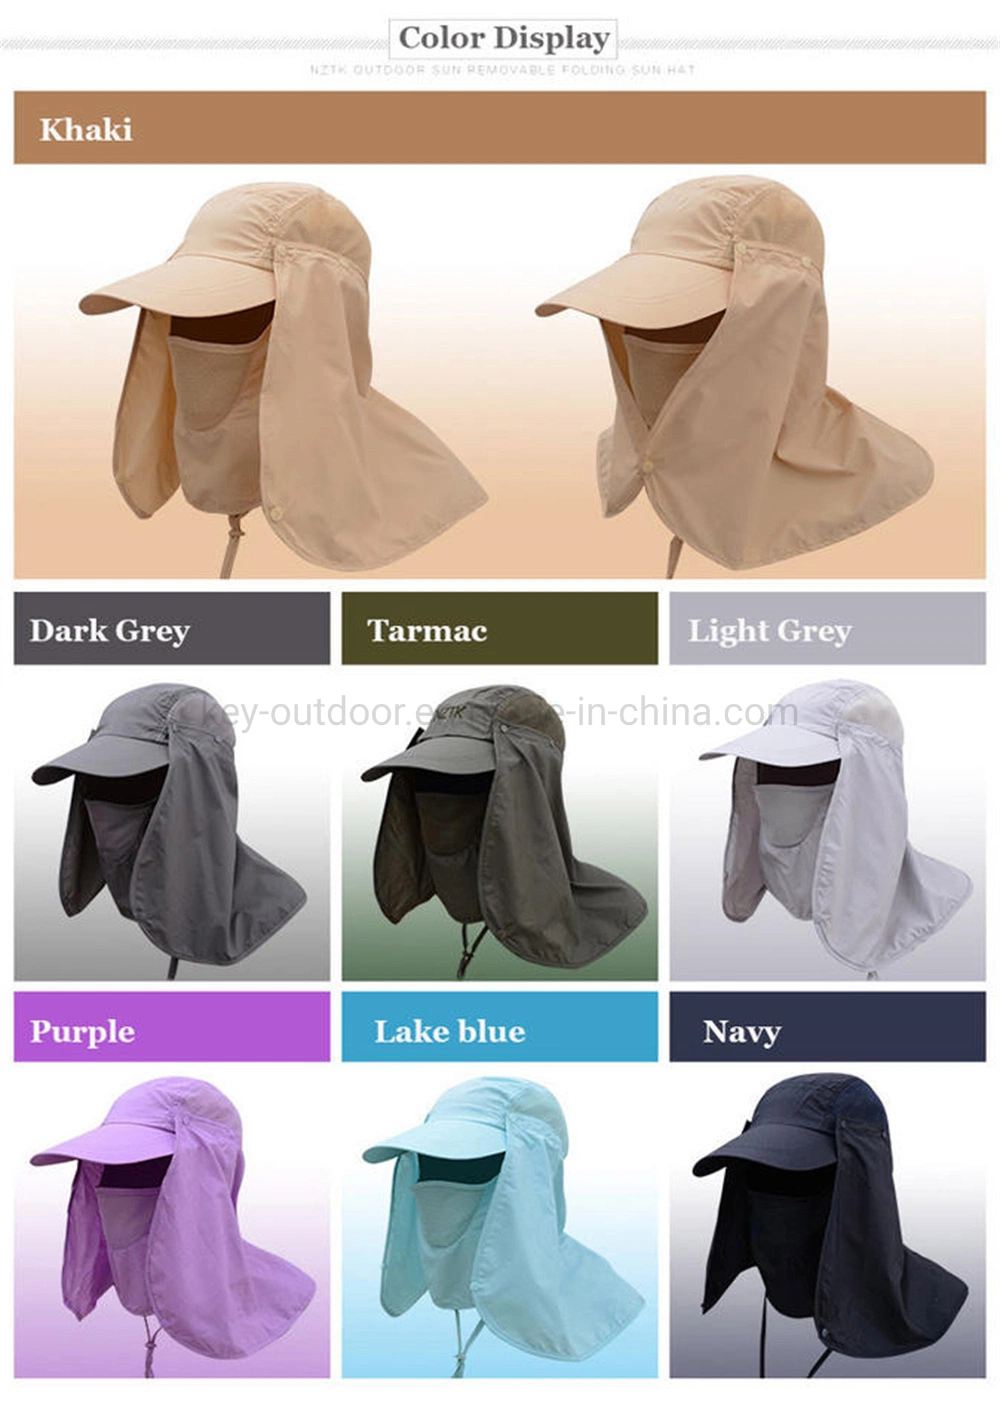 Full Face Mask Cover Face Shield Sun Visor Fishing Hat Summer UV Protection Hood Cap Hats for Outdoor Sports Hiking Cycling Hat for Men Women